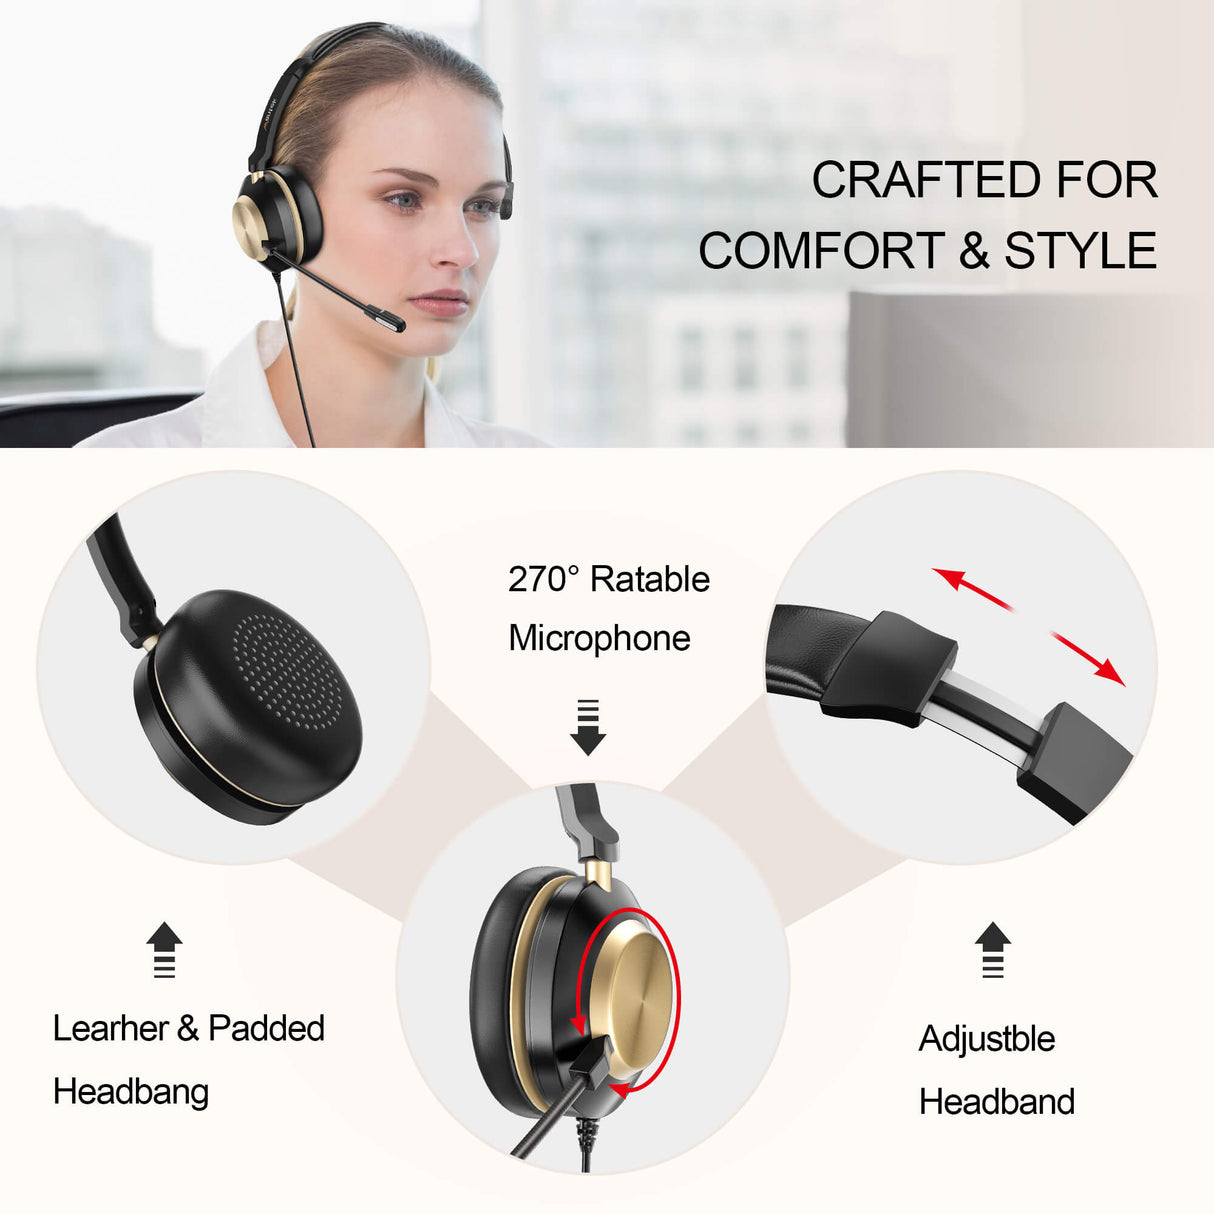 Wantek® h882 stereo 3-in-1 USB headset for Phones/Laptop/PC